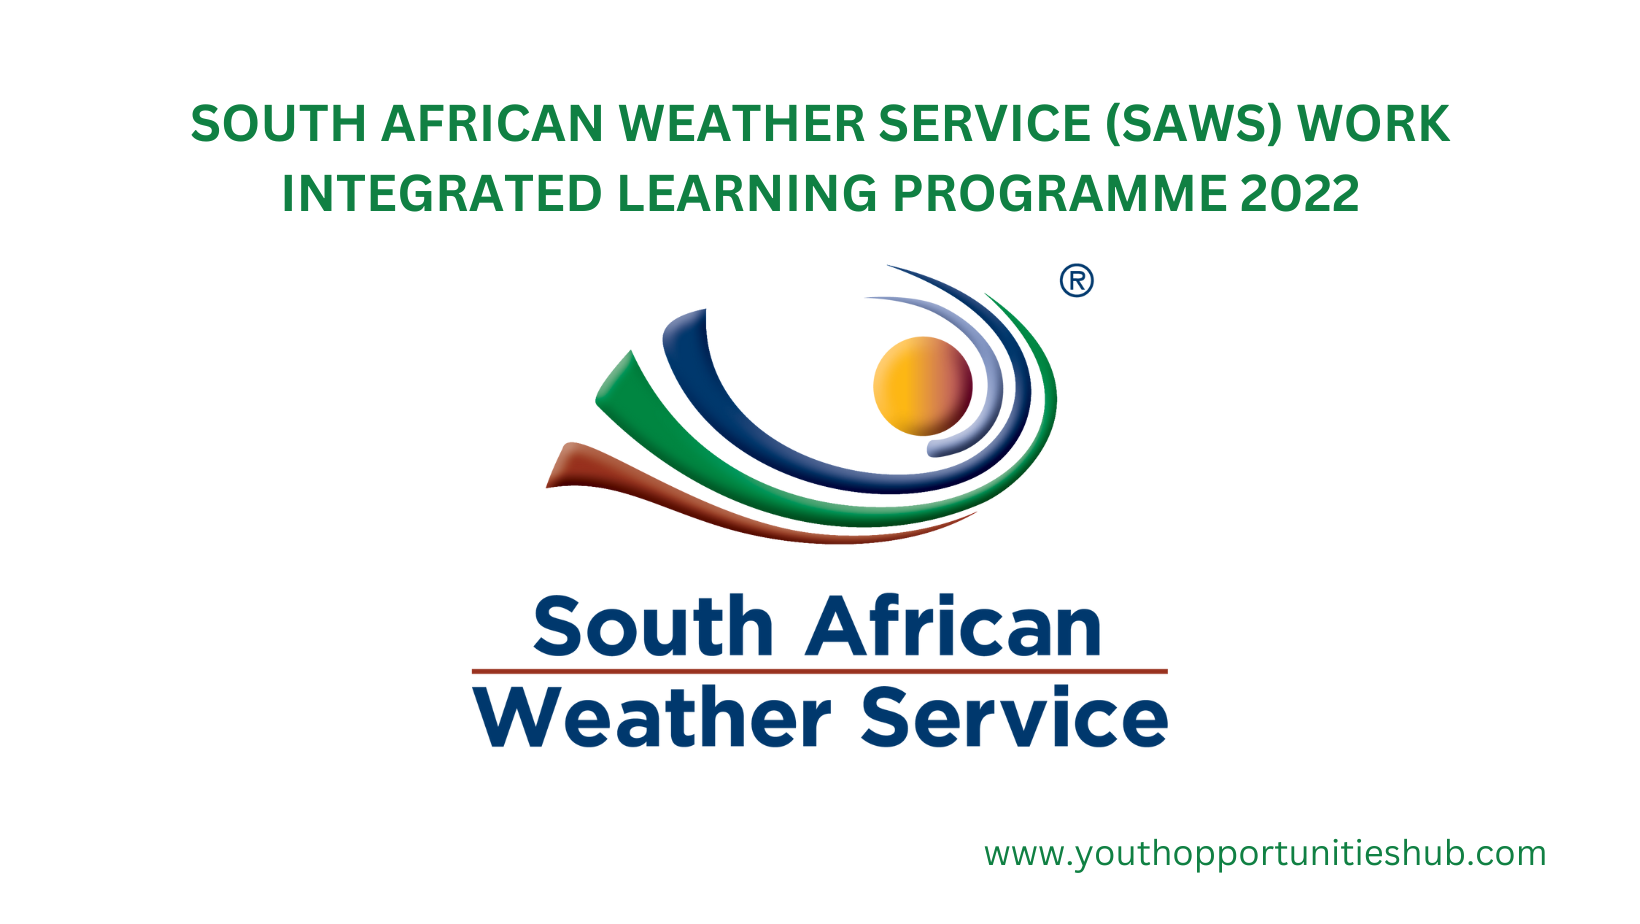 The South African Weather Service SAWS Is Inviting Young South Africans To Apply For Its Bursary And Internship Programme 1 